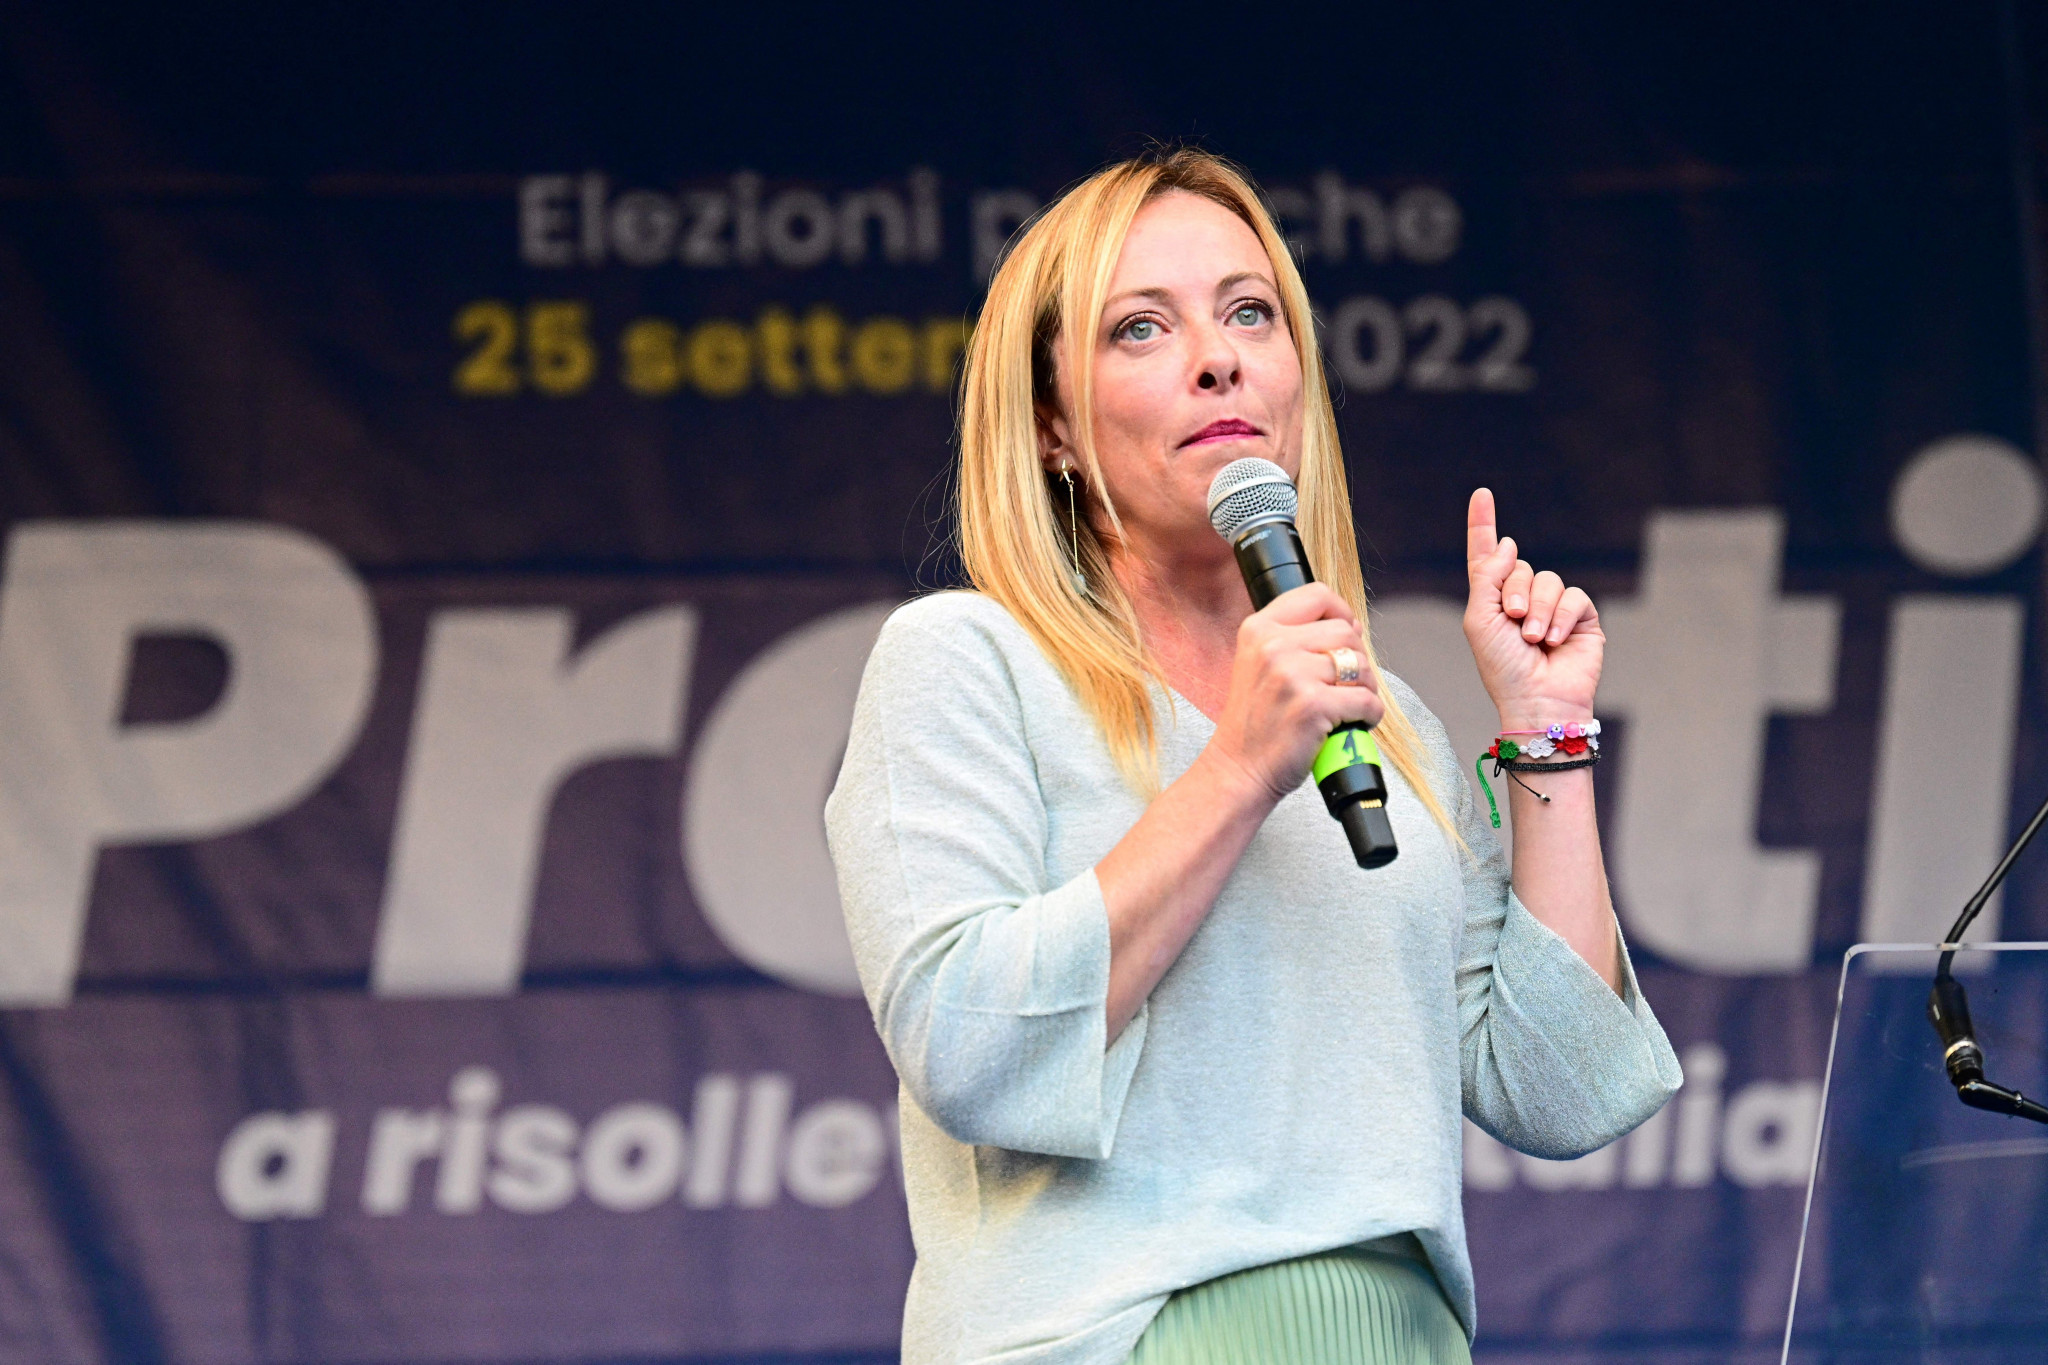 Giorgia Meloni is expected to become Italy's Prime Minister after the election, and her Brothers of Italy party has insisted that a new Government should decide on "strategic decisions" such as the formation of the make-up of the Milan Cortina 2026 Organising Committee ©Getty Images